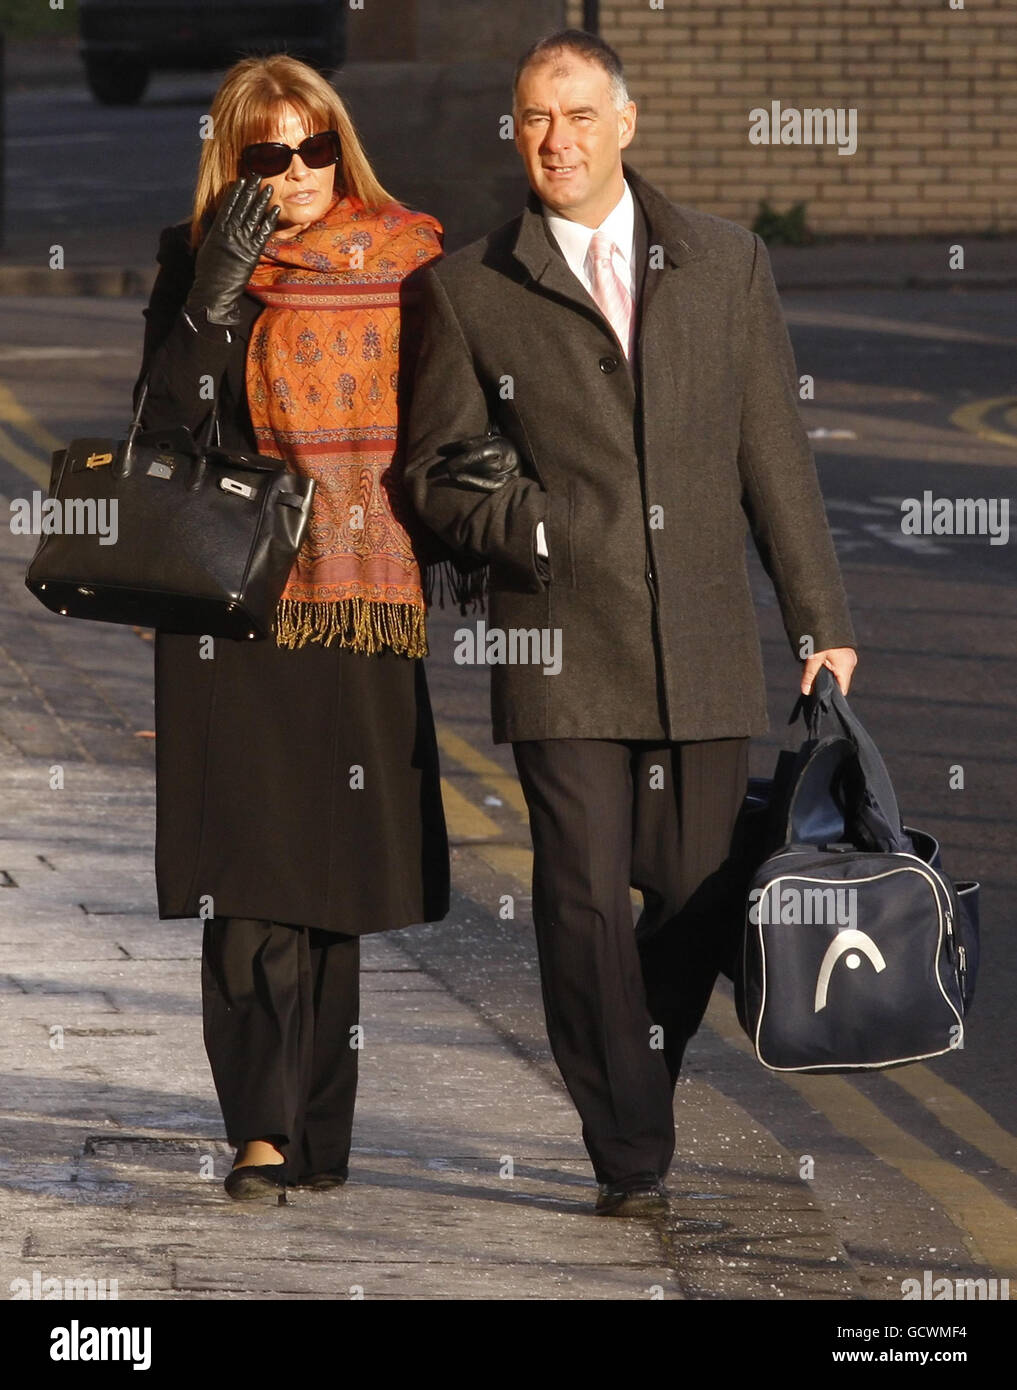 Tommy and Gail Sheridan arrive at Glasgow High Court where they are on trial accused of lying under oath during Mr Sheridan's successful defamation action against the News of the World newspaper in 2006. Stock Photo